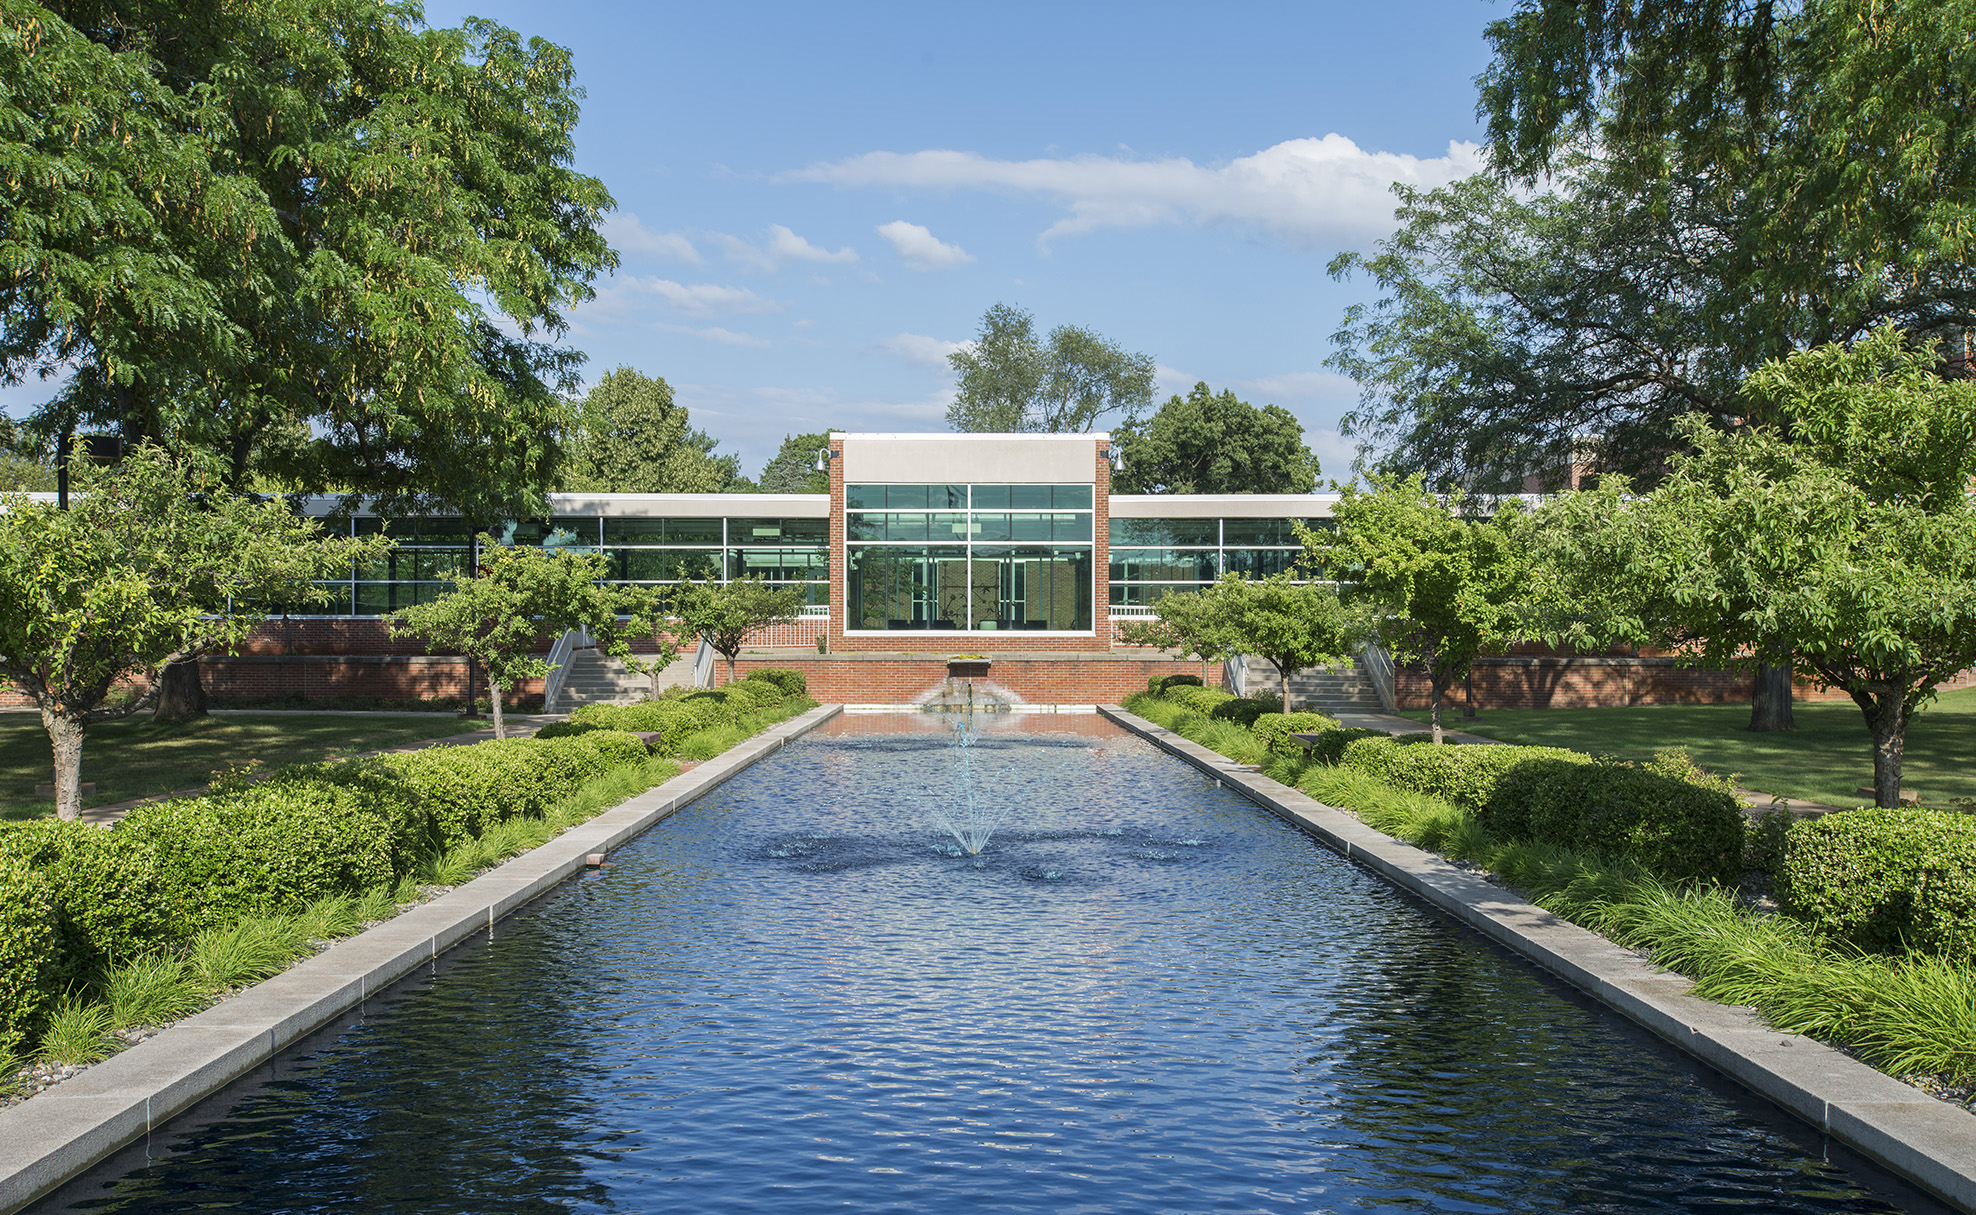 An exterior view of the entrance to KCC's North Avenue campus looking over the reflecting pools.